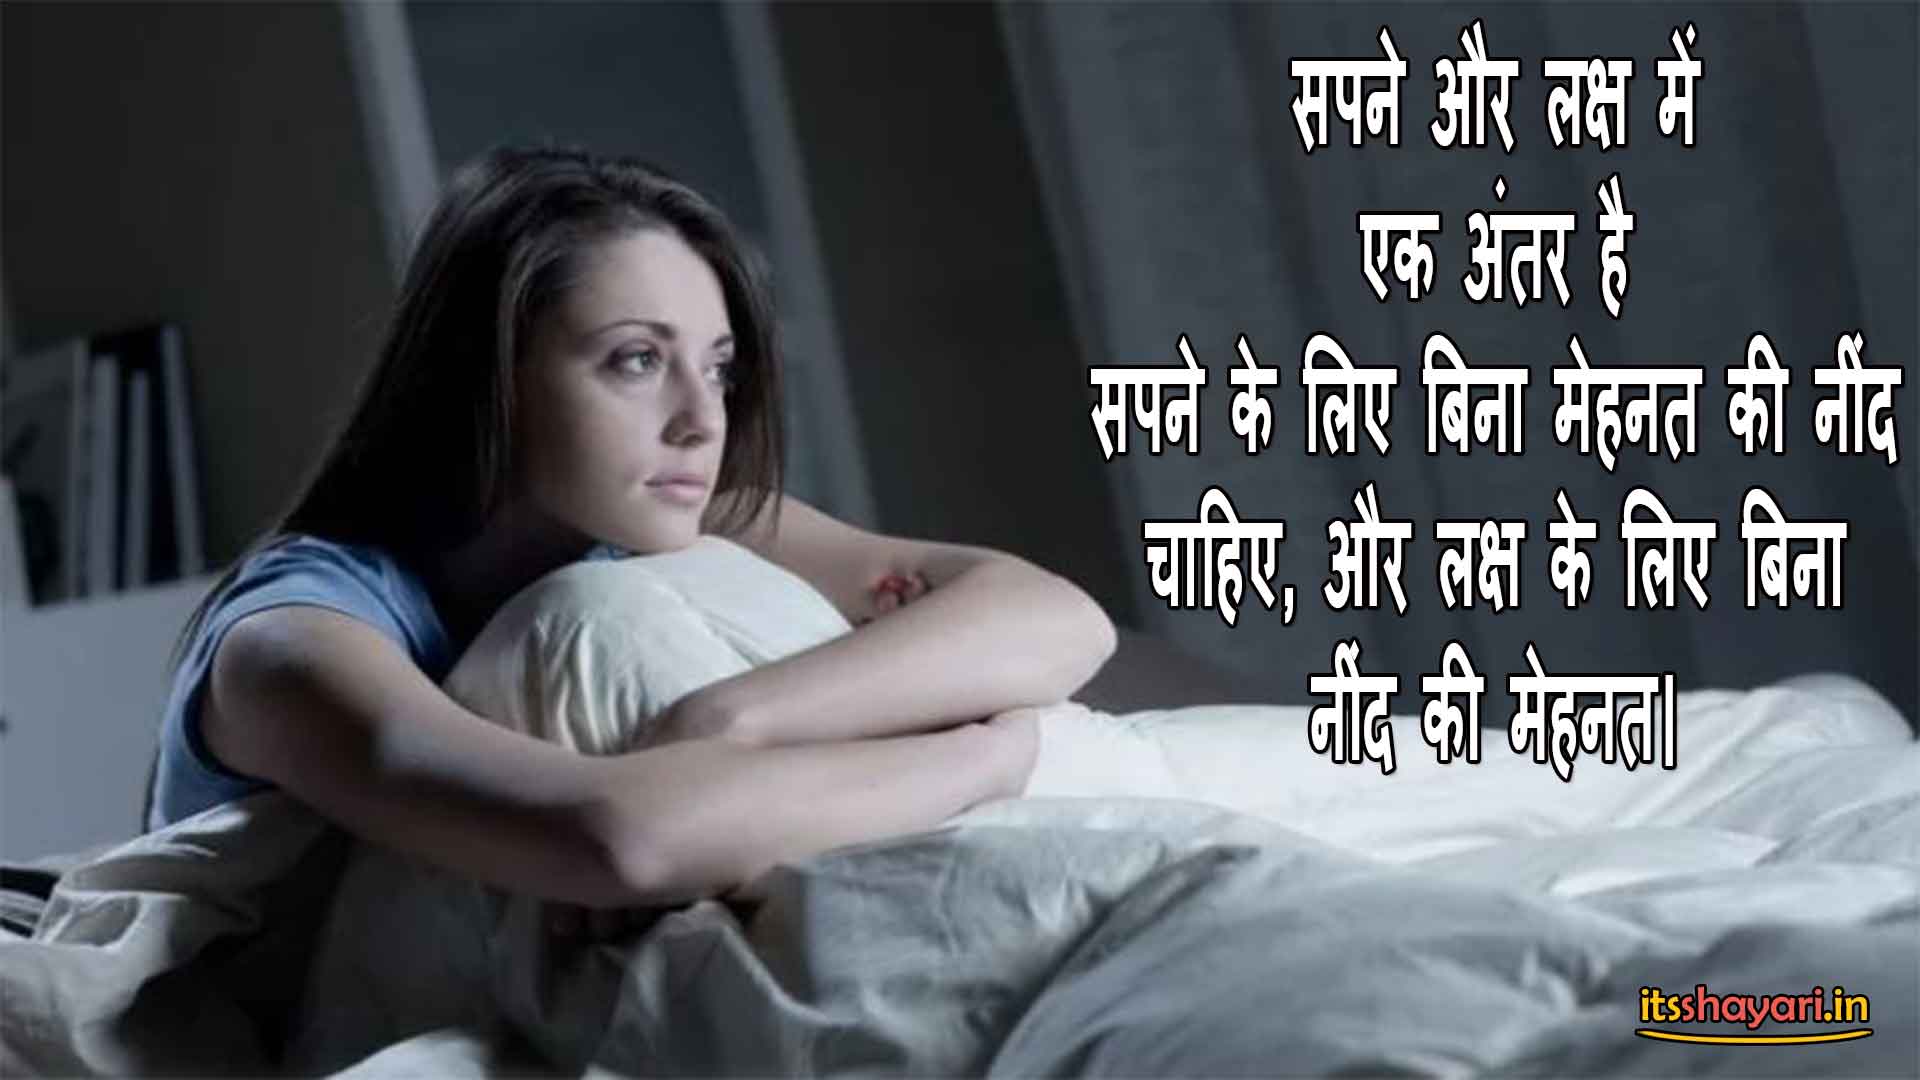 self motivation motivational thoughts in hindi